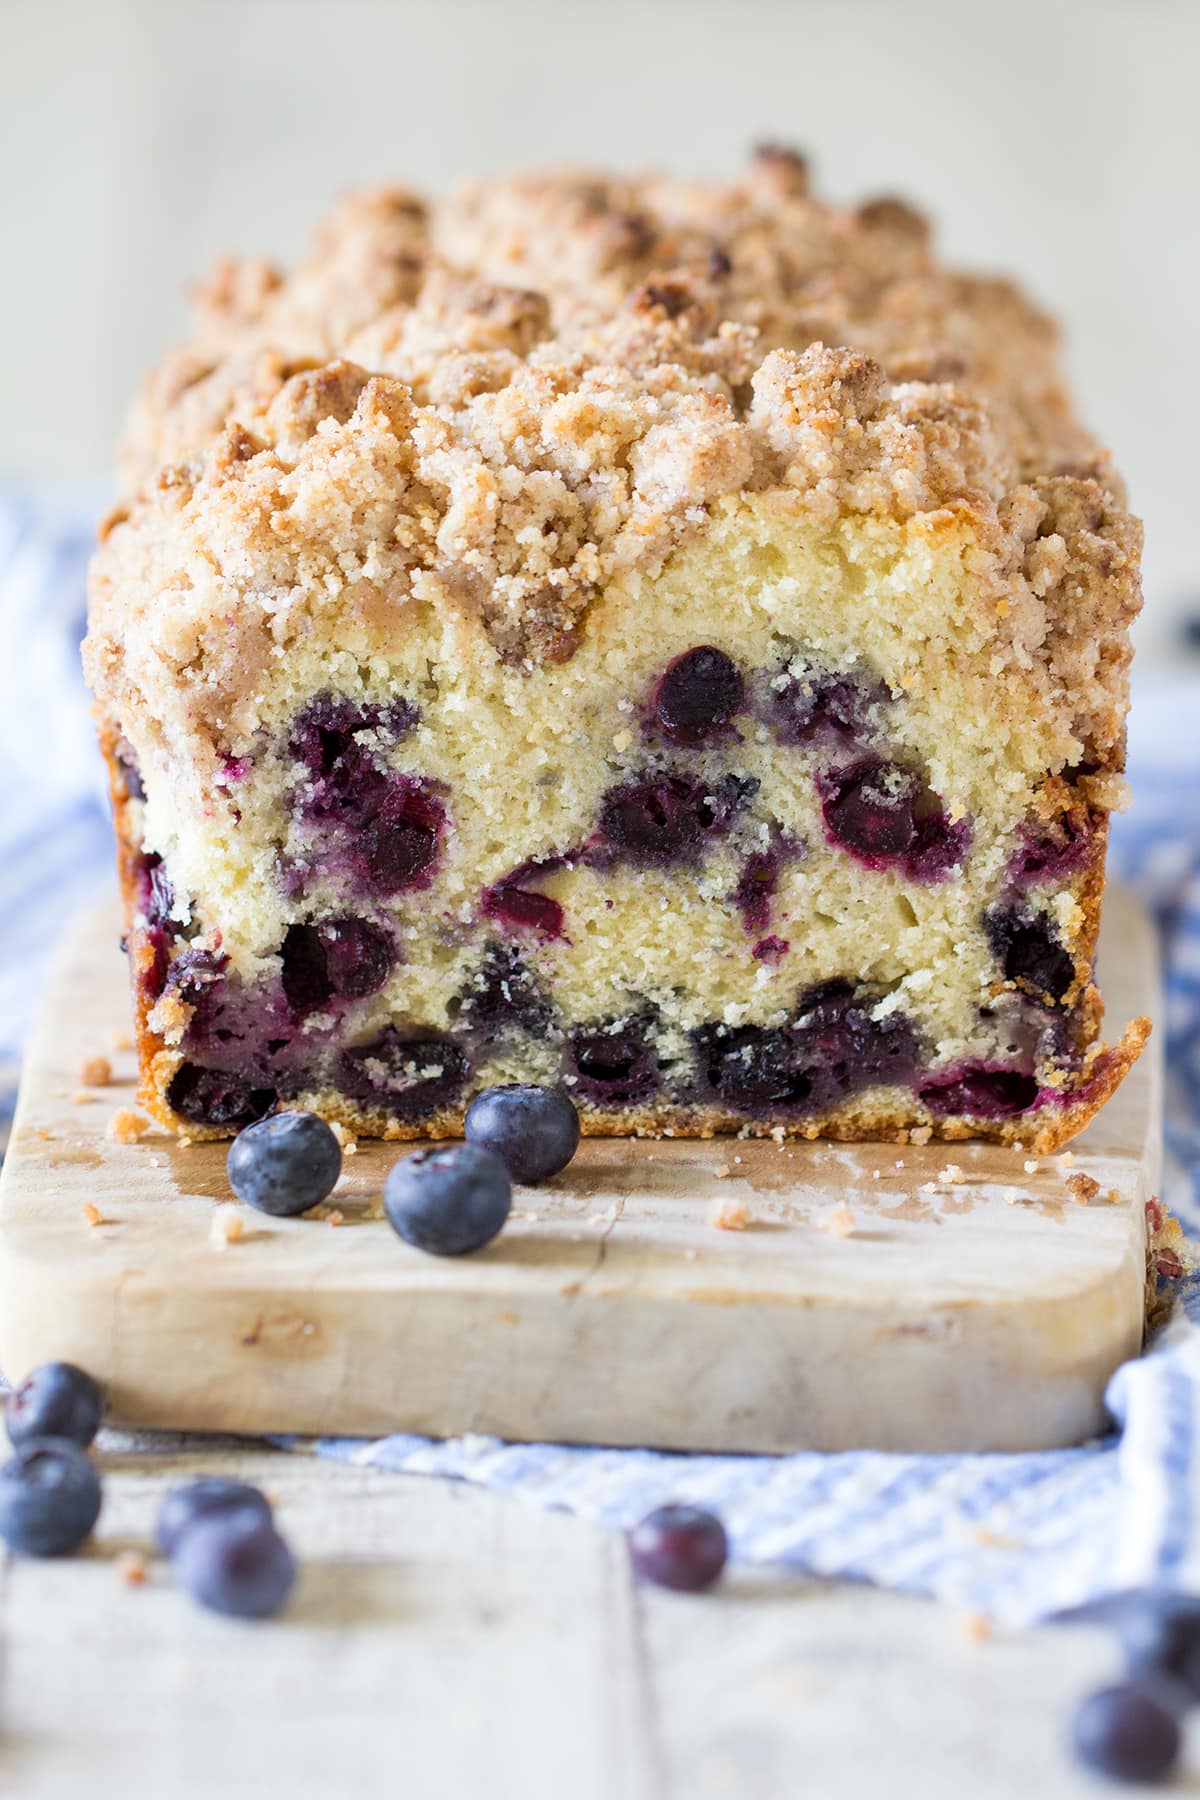 Blueberry Muffin Coffee Cake with a cinnamon crumble topping.